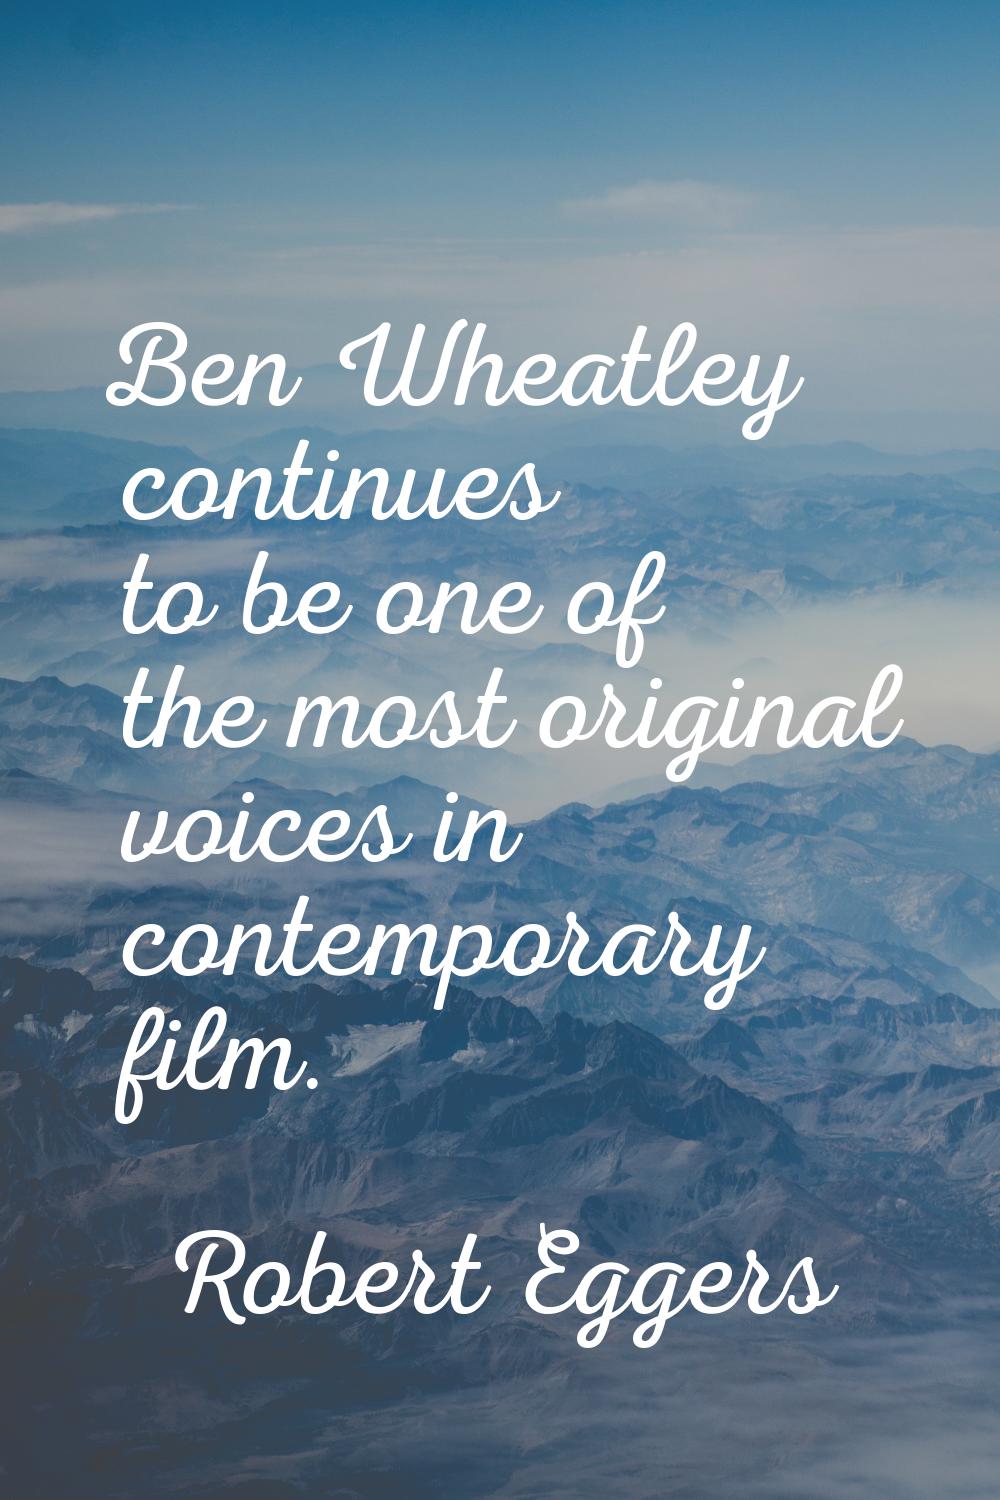 Ben Wheatley continues to be one of the most original voices in contemporary film.